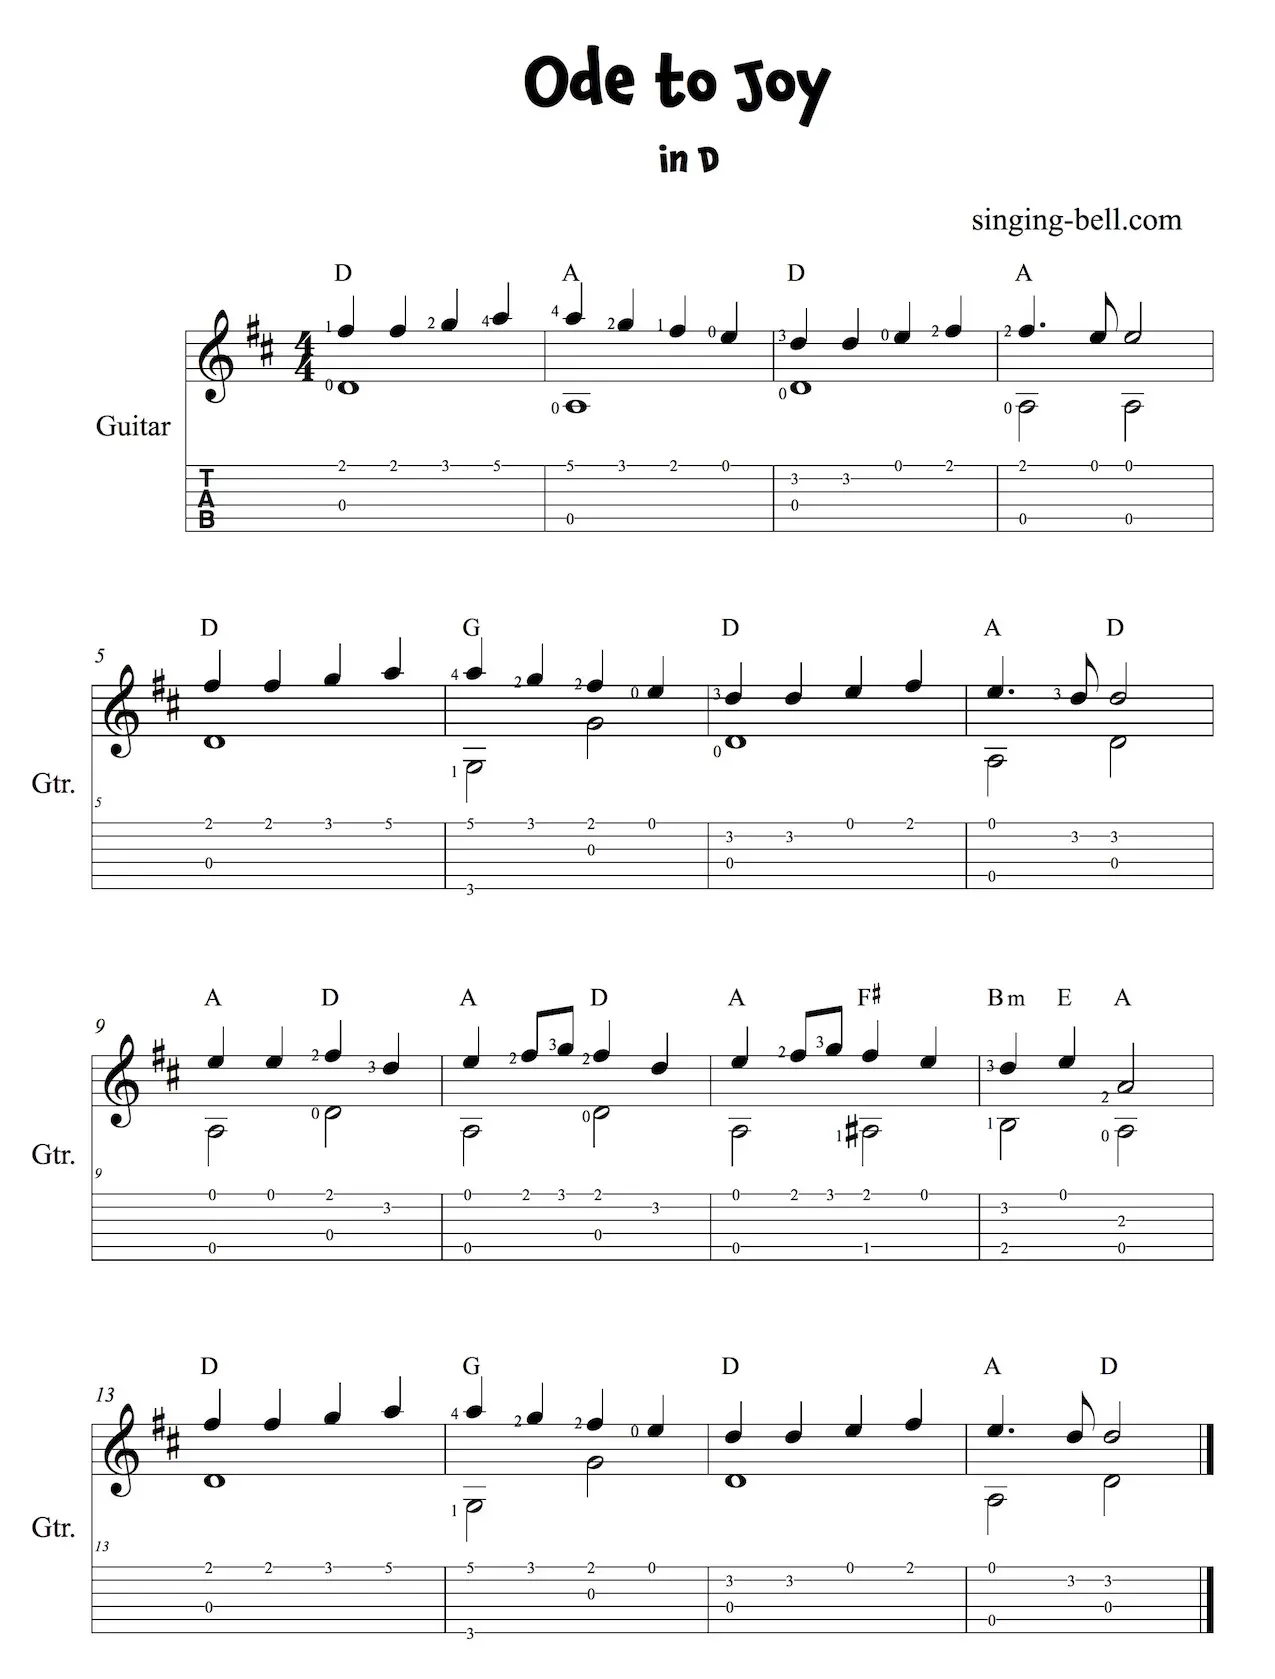 Ode to Joy Easy Guitar Sheet Music with notes chords and tablature in the key of D.